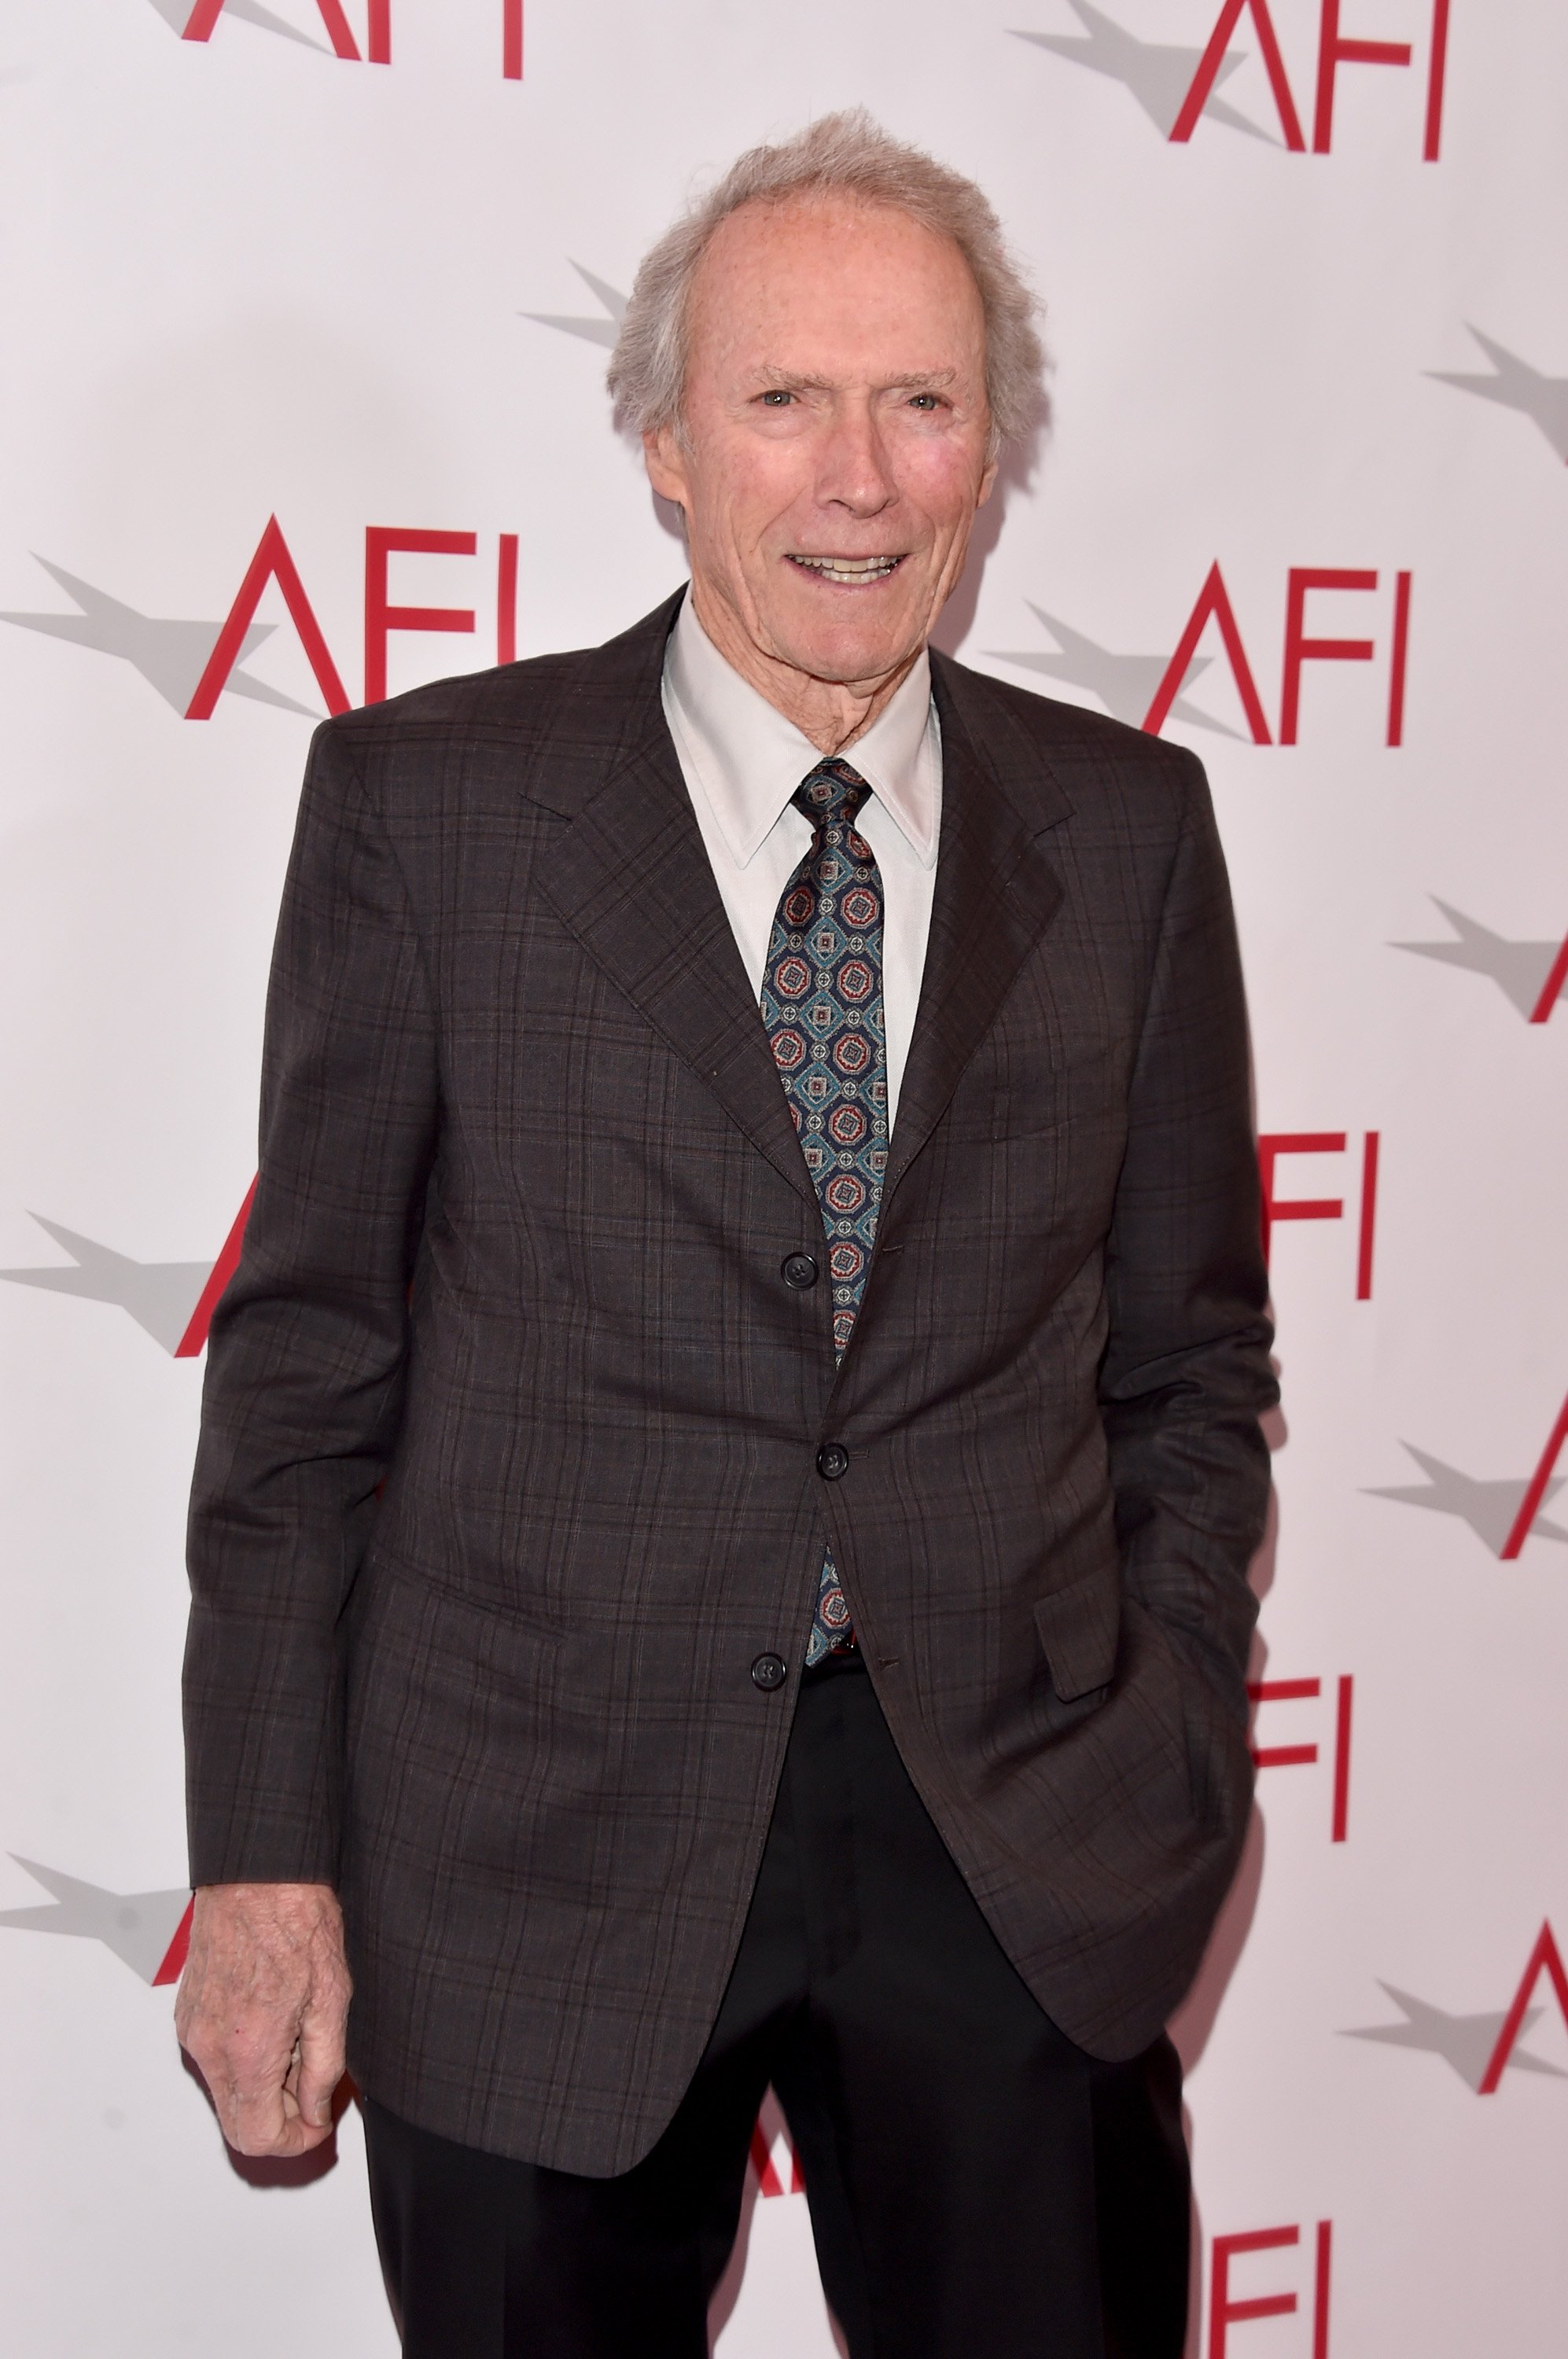 Clint Eastwood at the 17th annual AFI Awards on January 6, 2017 | Photo: GettyImages